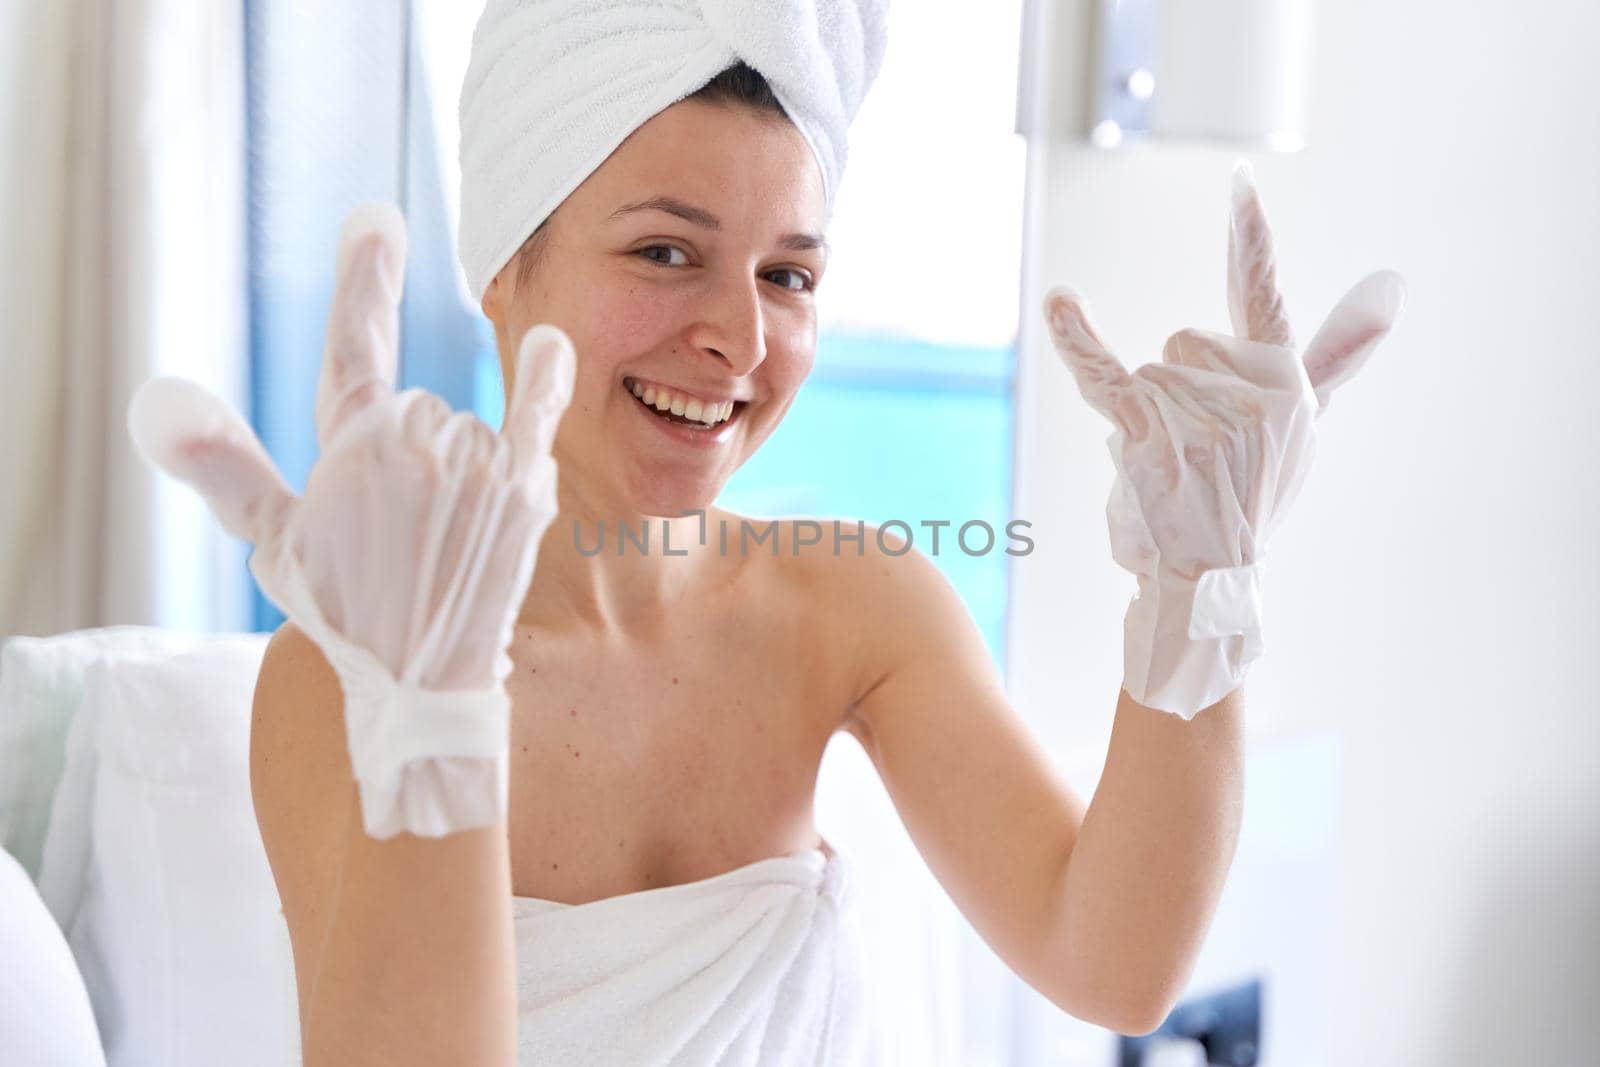 After a shower, a girl wrapped in a towel uses cosmetic gloves to moisturize the skin of her hands. Cosmetic trends for body care at home.